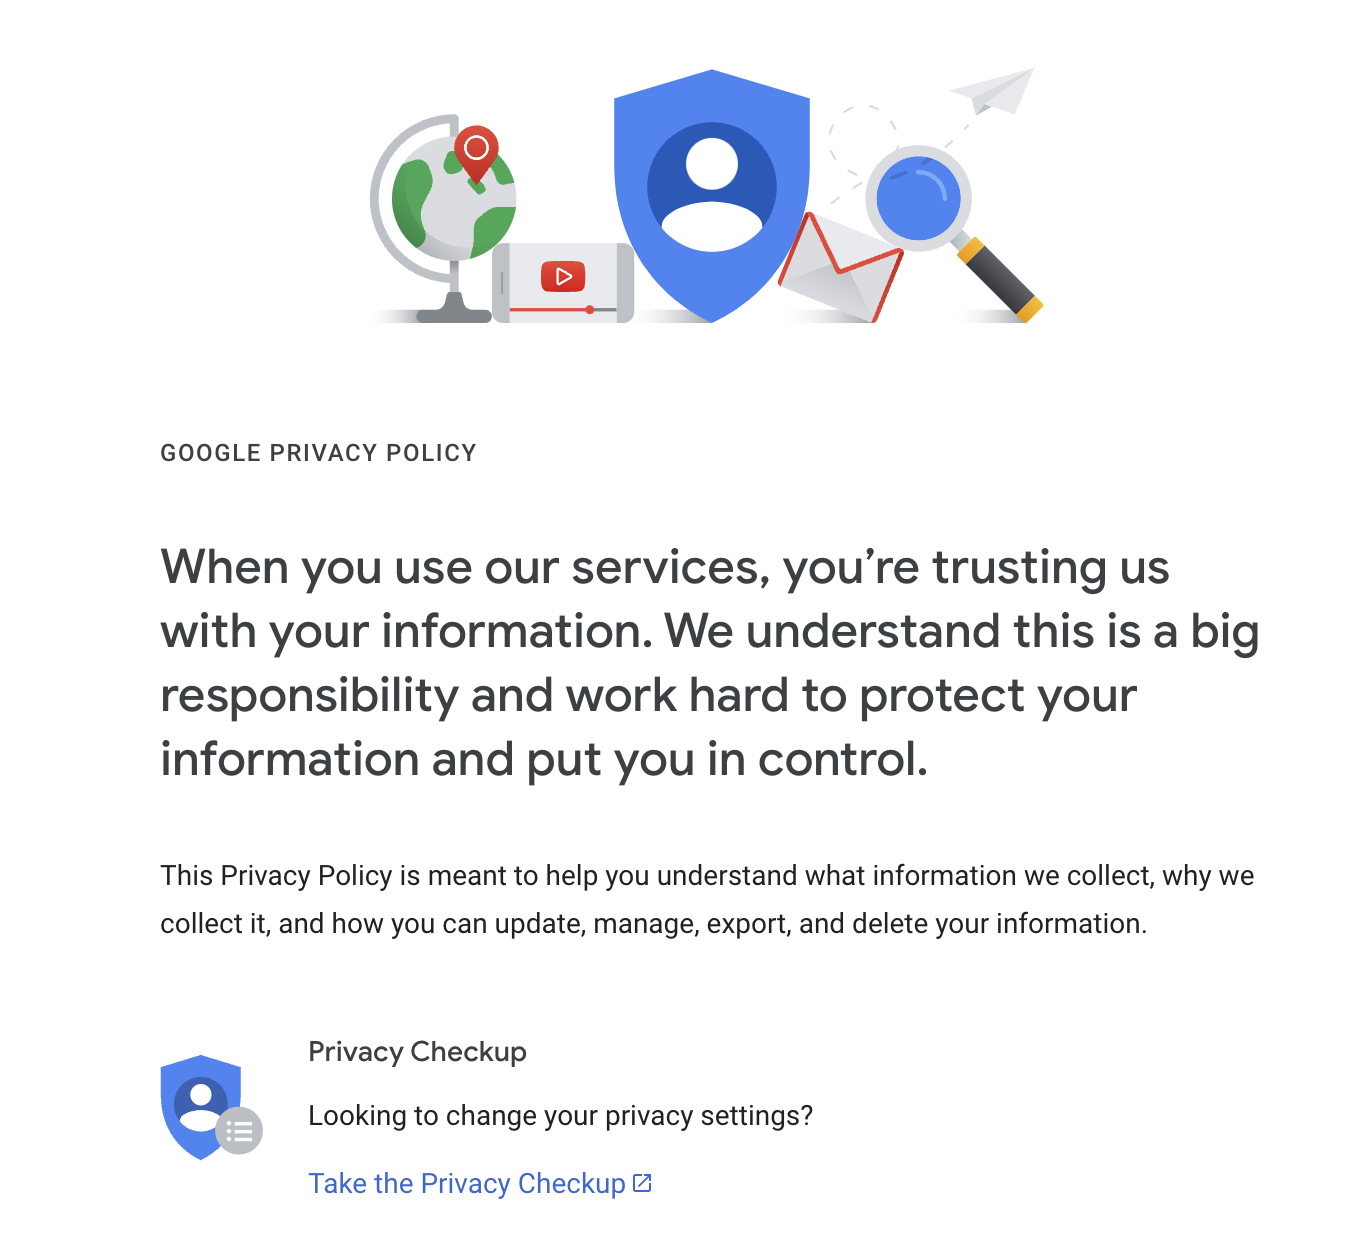 google drive privacy policy - Google Privacy Policy D When you use our services, you're trusting us with your information. We understand this is a big responsibility and work hard to protect your information and put you in control. This Privacy Policy is